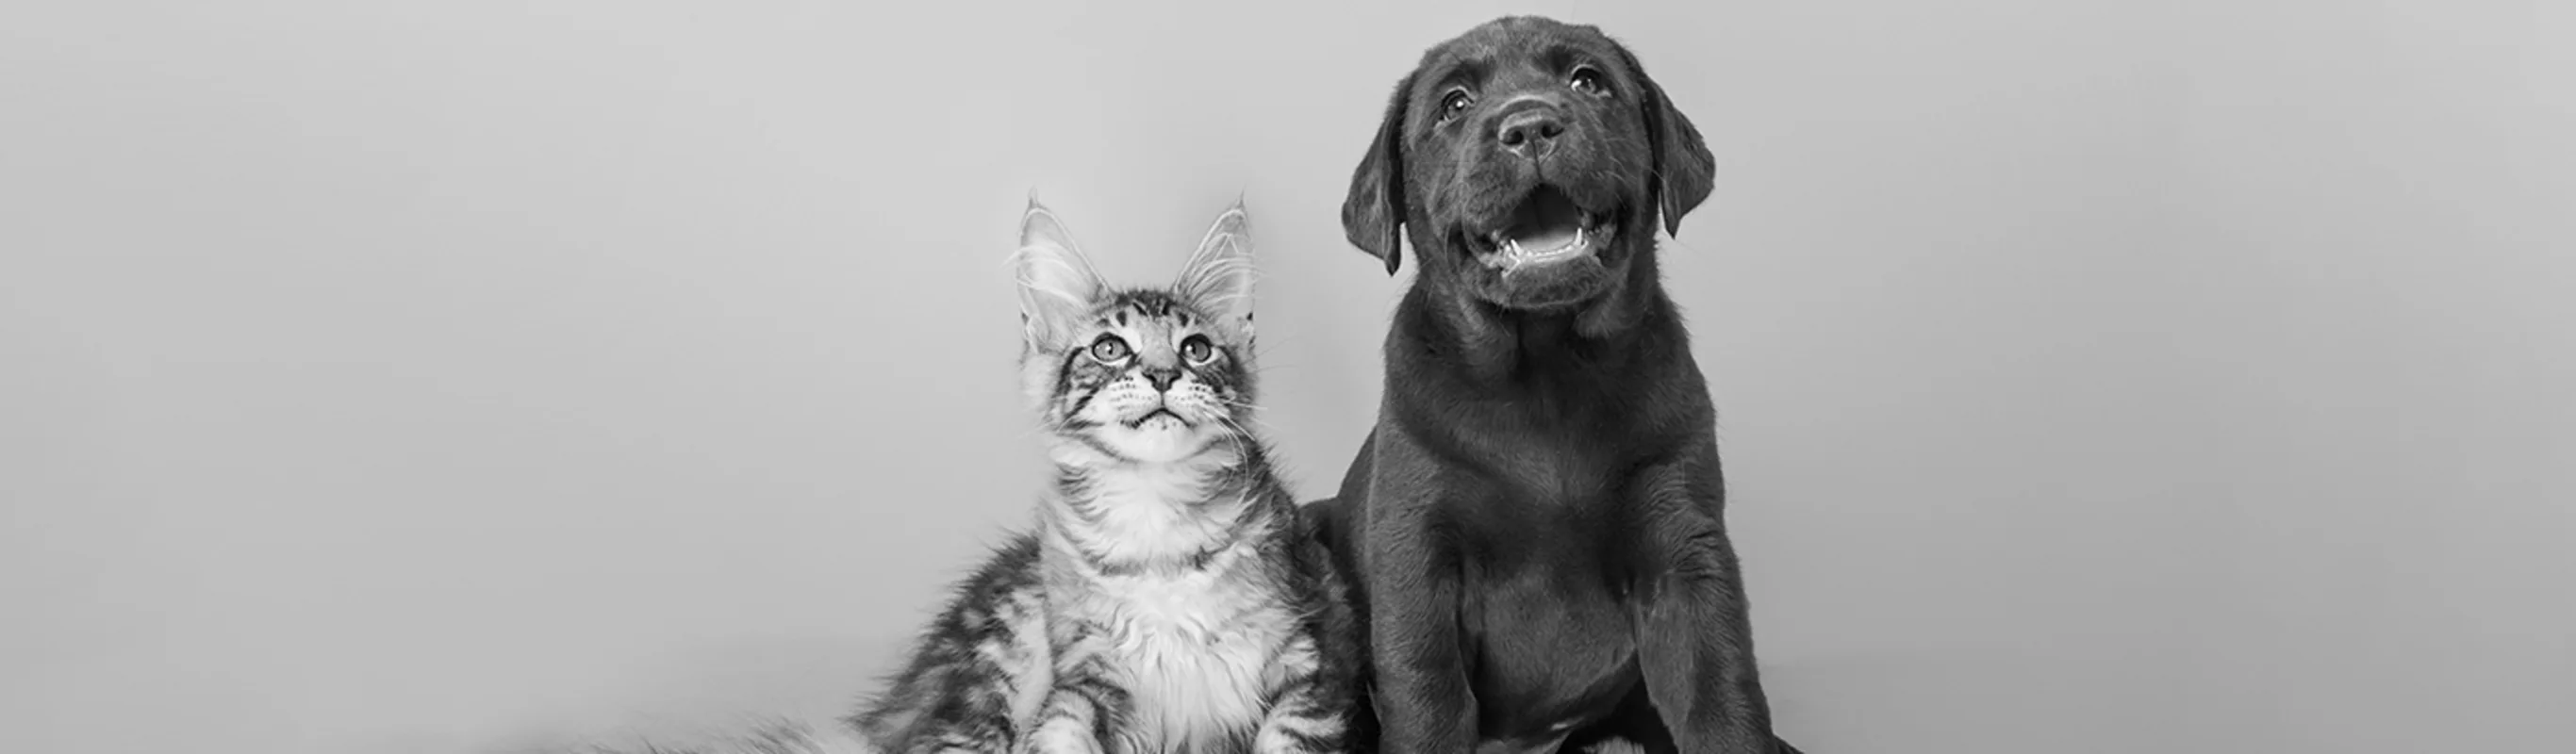 Black and white photo of a puppy and kitten 